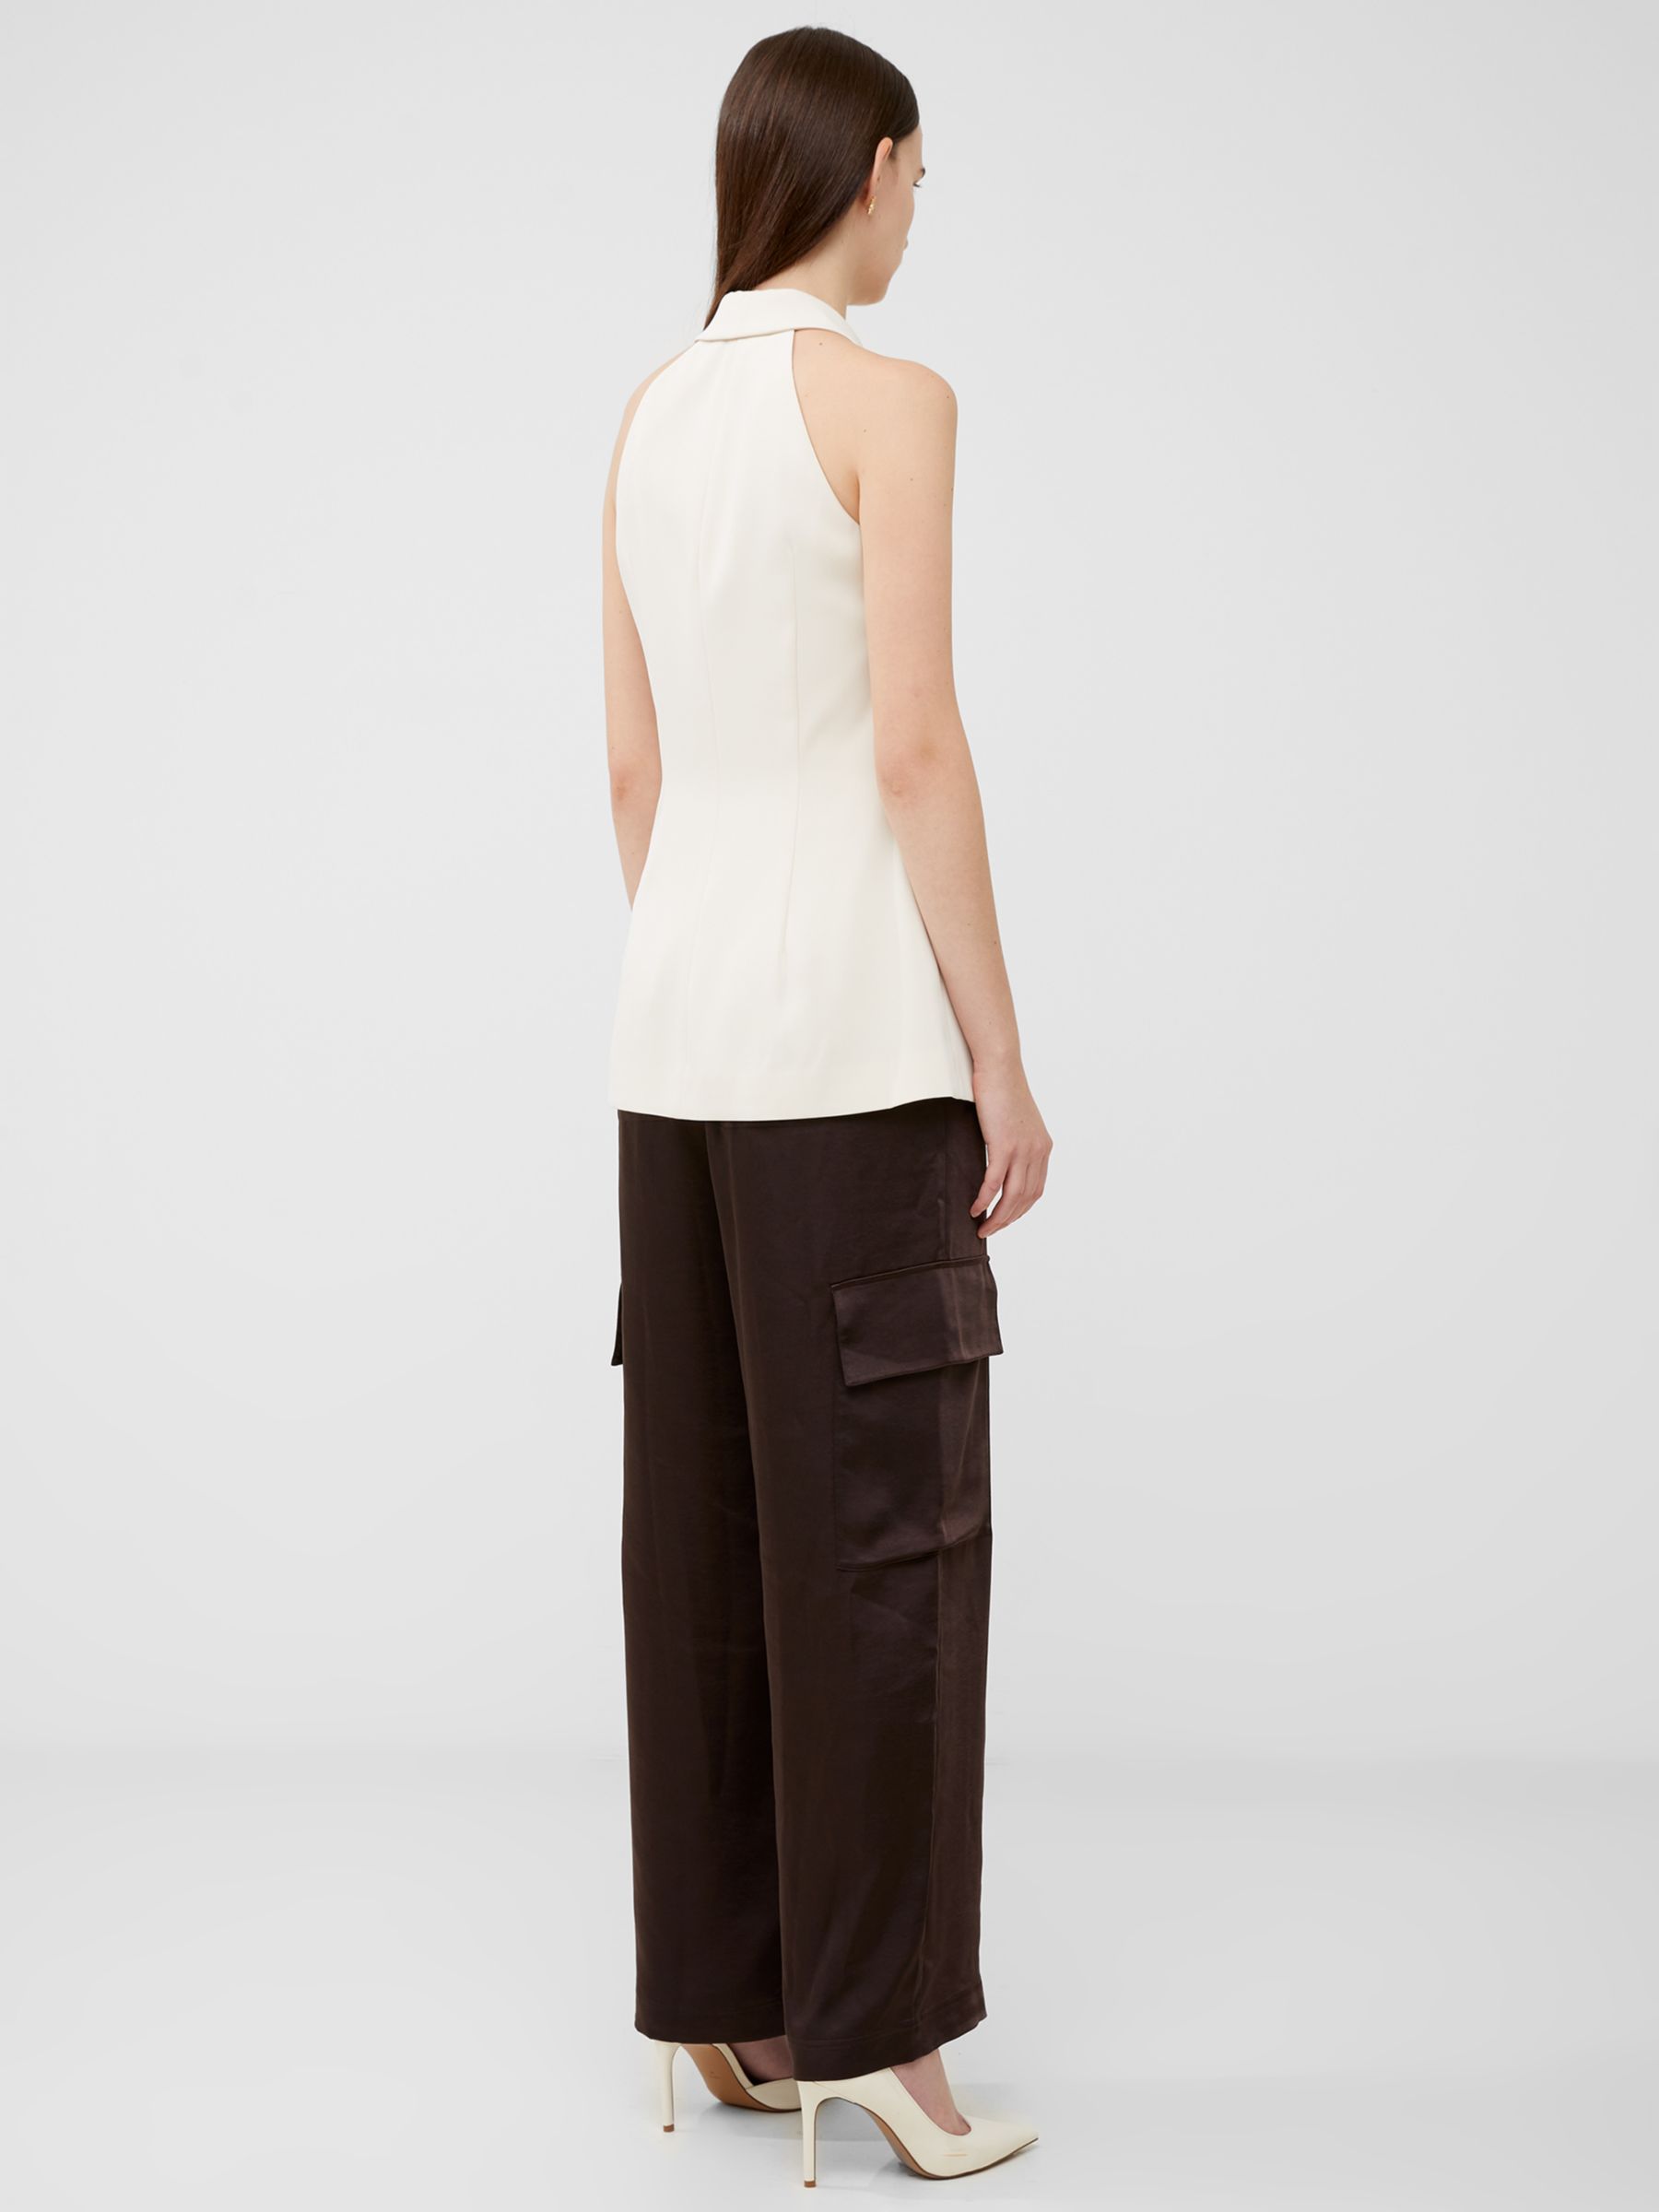 Buy French Connection Harrie Halter Waistcoat, Classic Cream Online at johnlewis.com